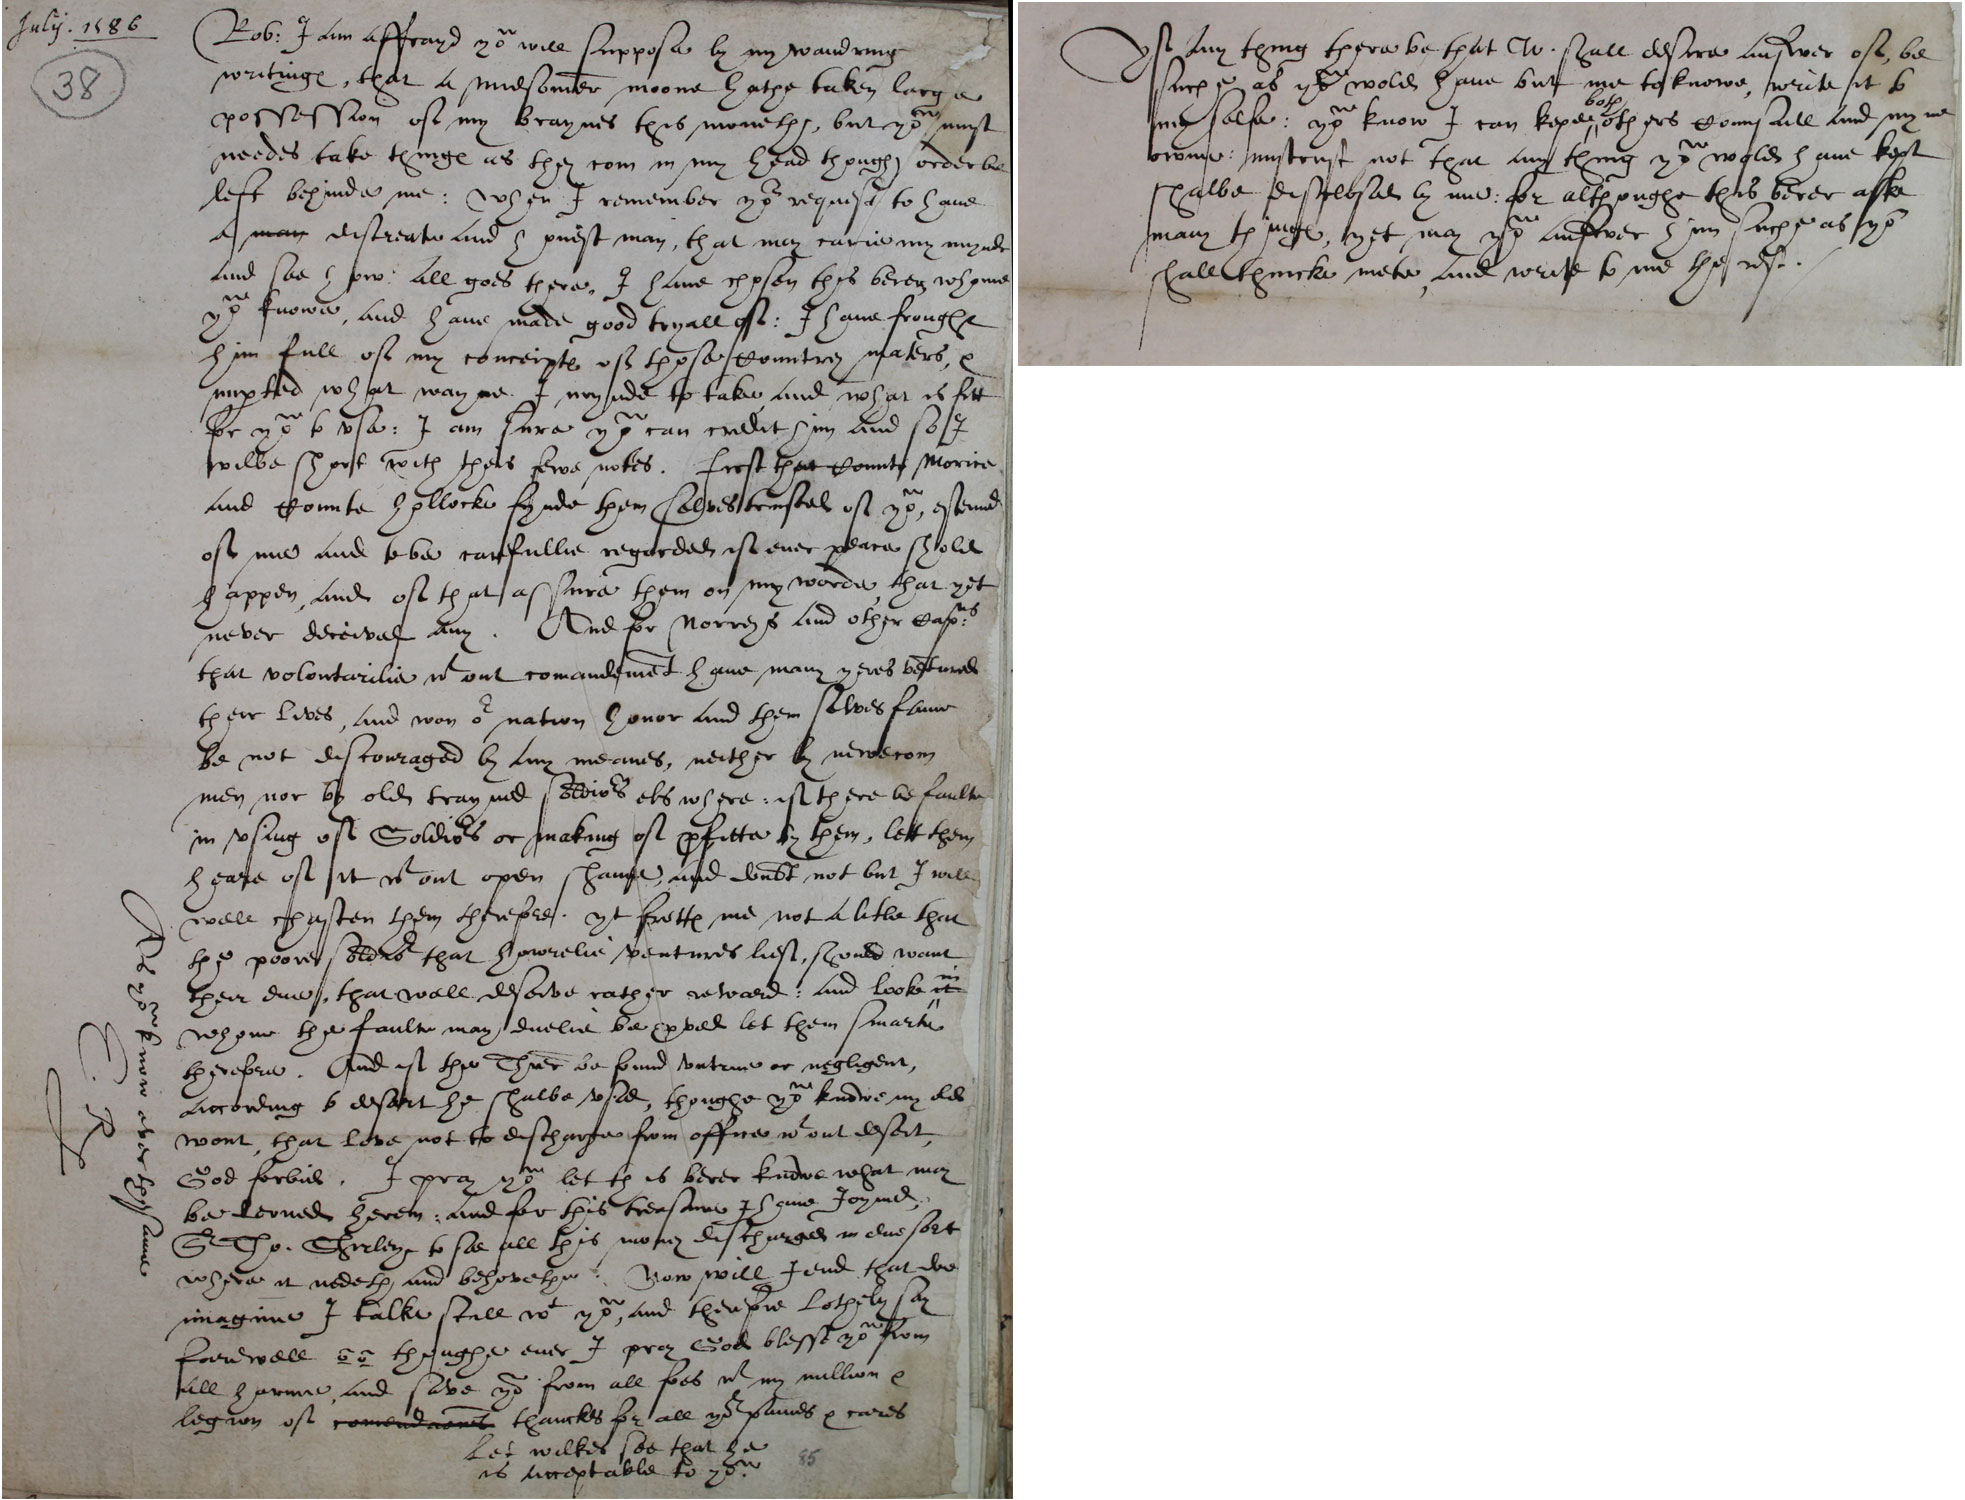 Elizabeth to Robert Dudley, Earl of Leicester, 19 July 1586 (SP 84/9 f.38)